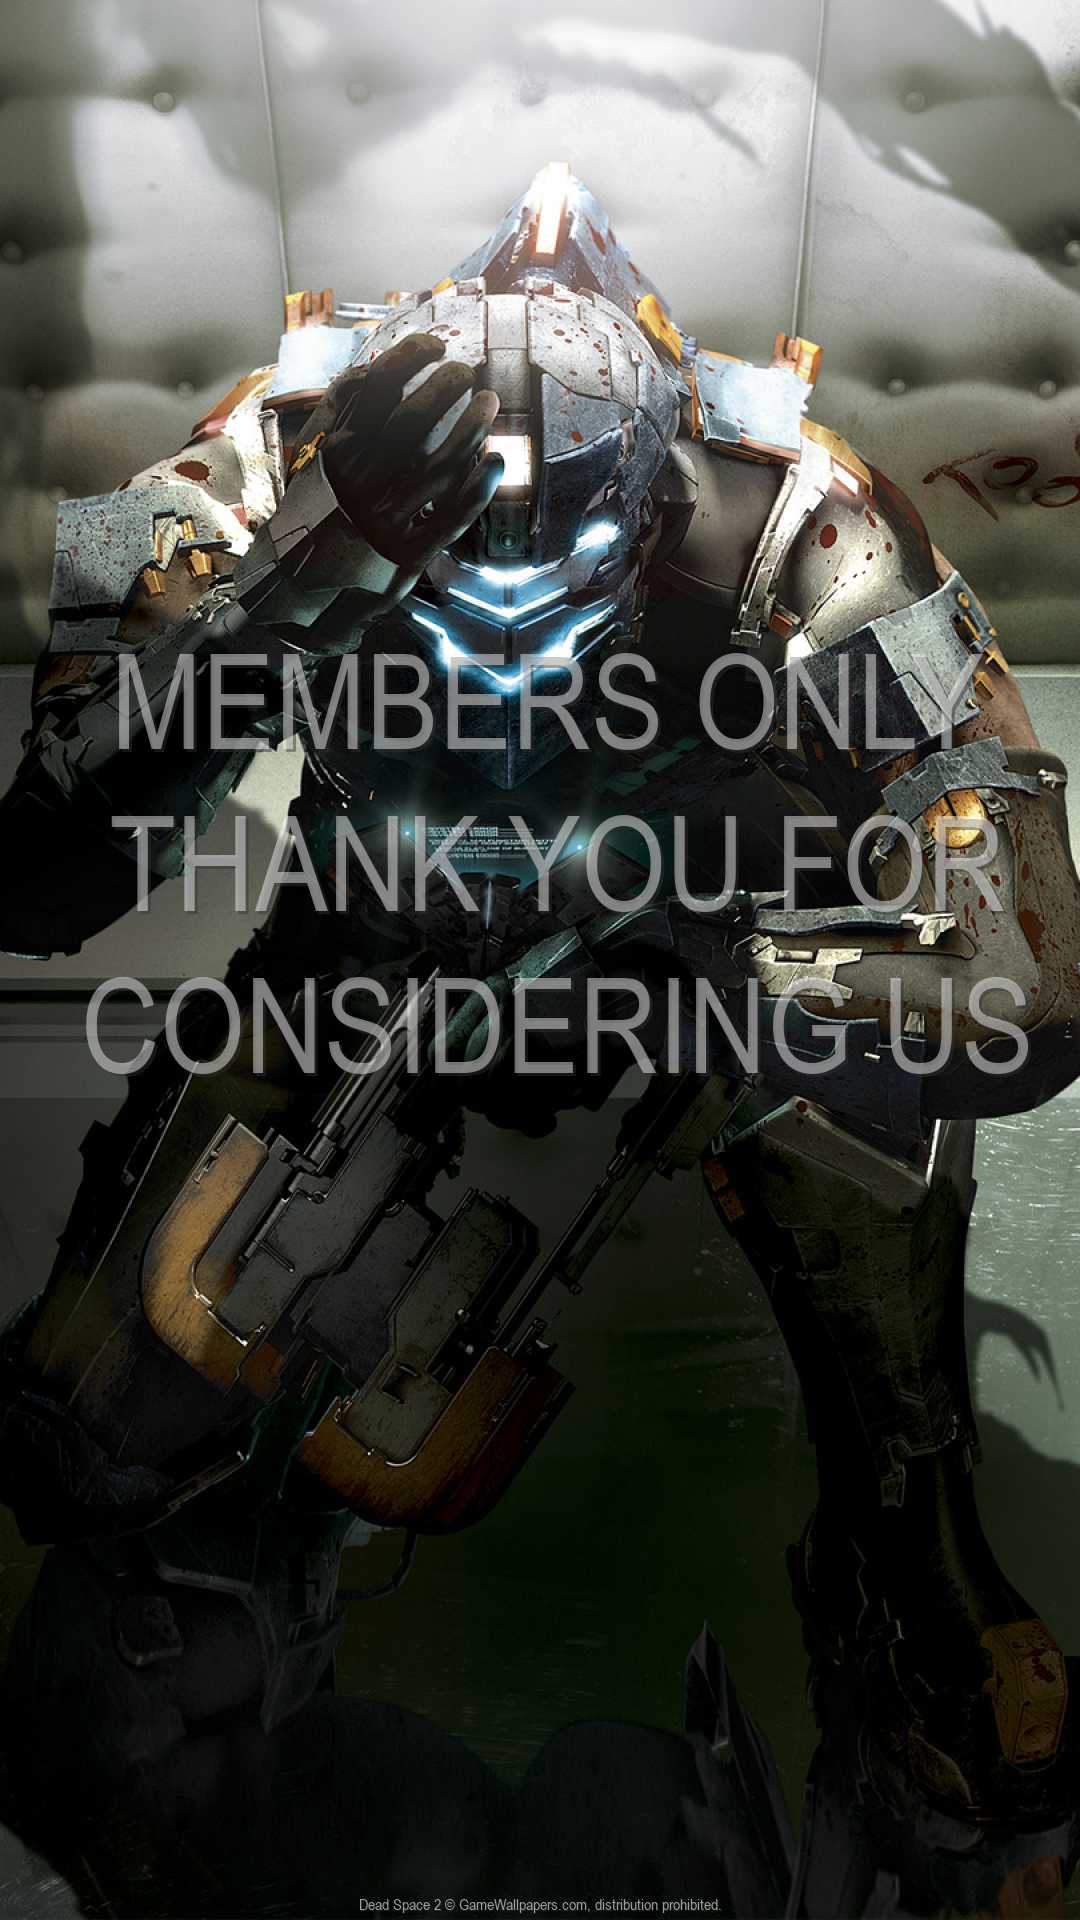 Dead Space 2 1080p%20Vertical Mobile wallpaper or background 02